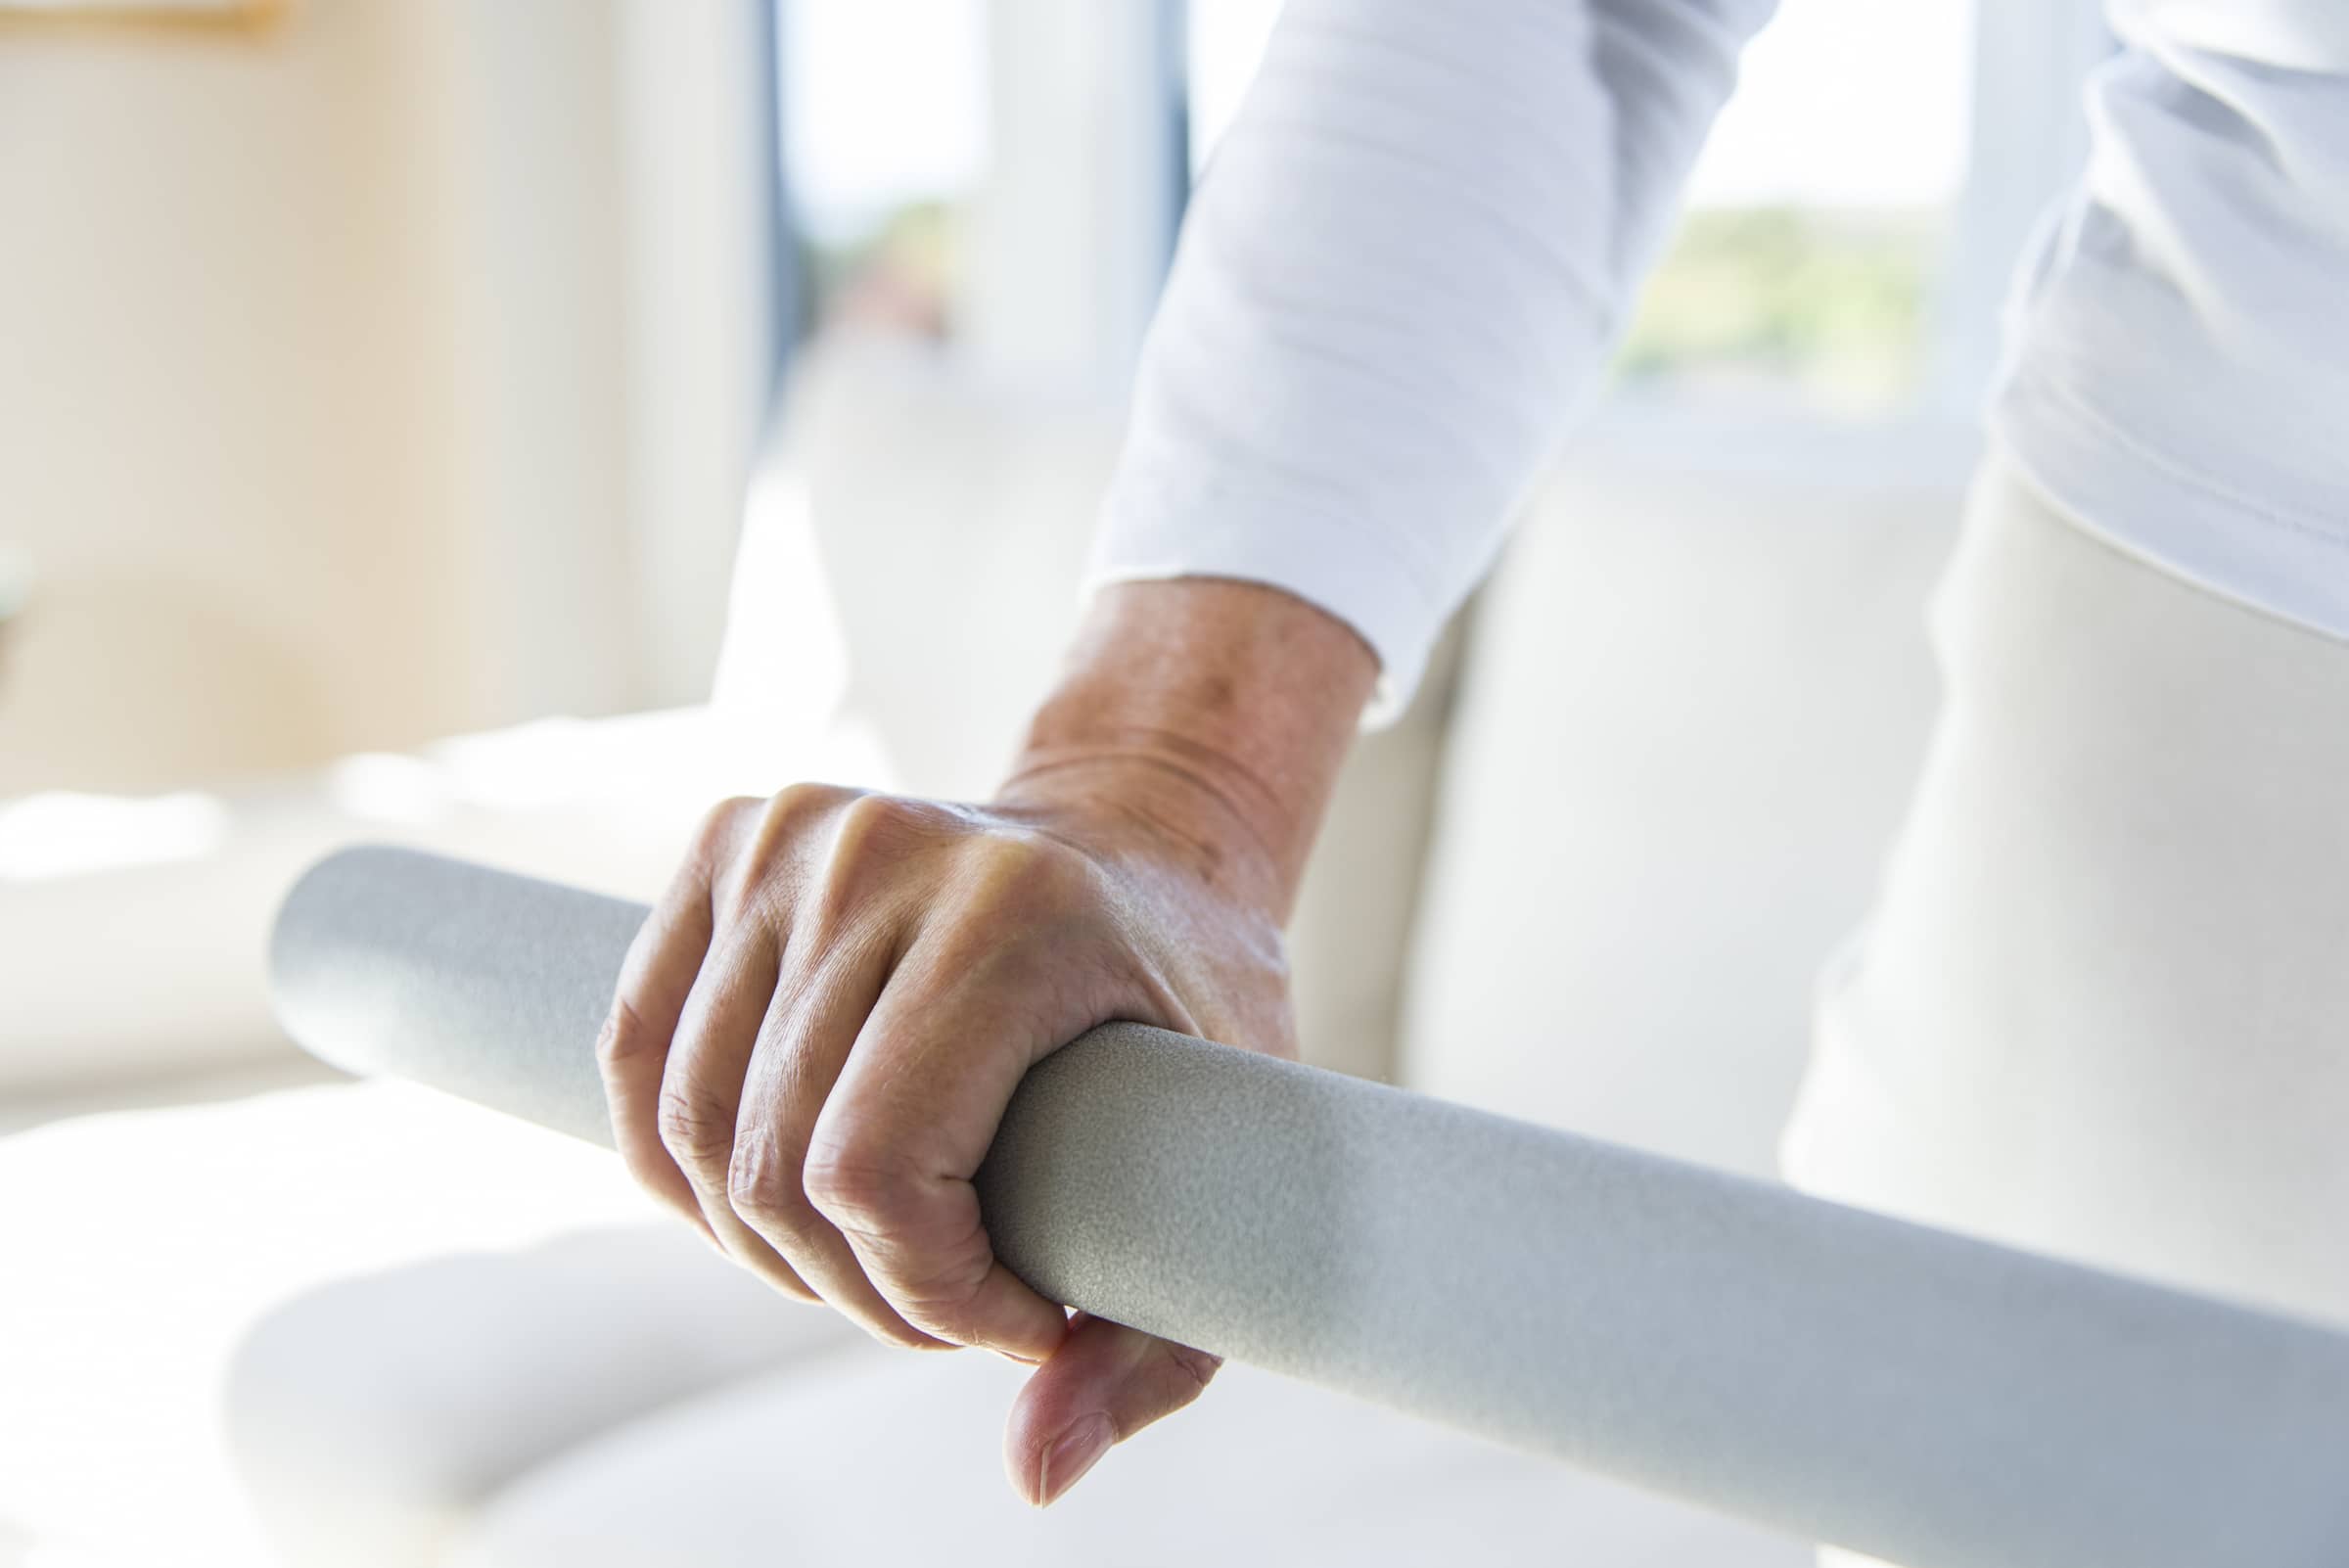 A hand holding on to a assistive rail